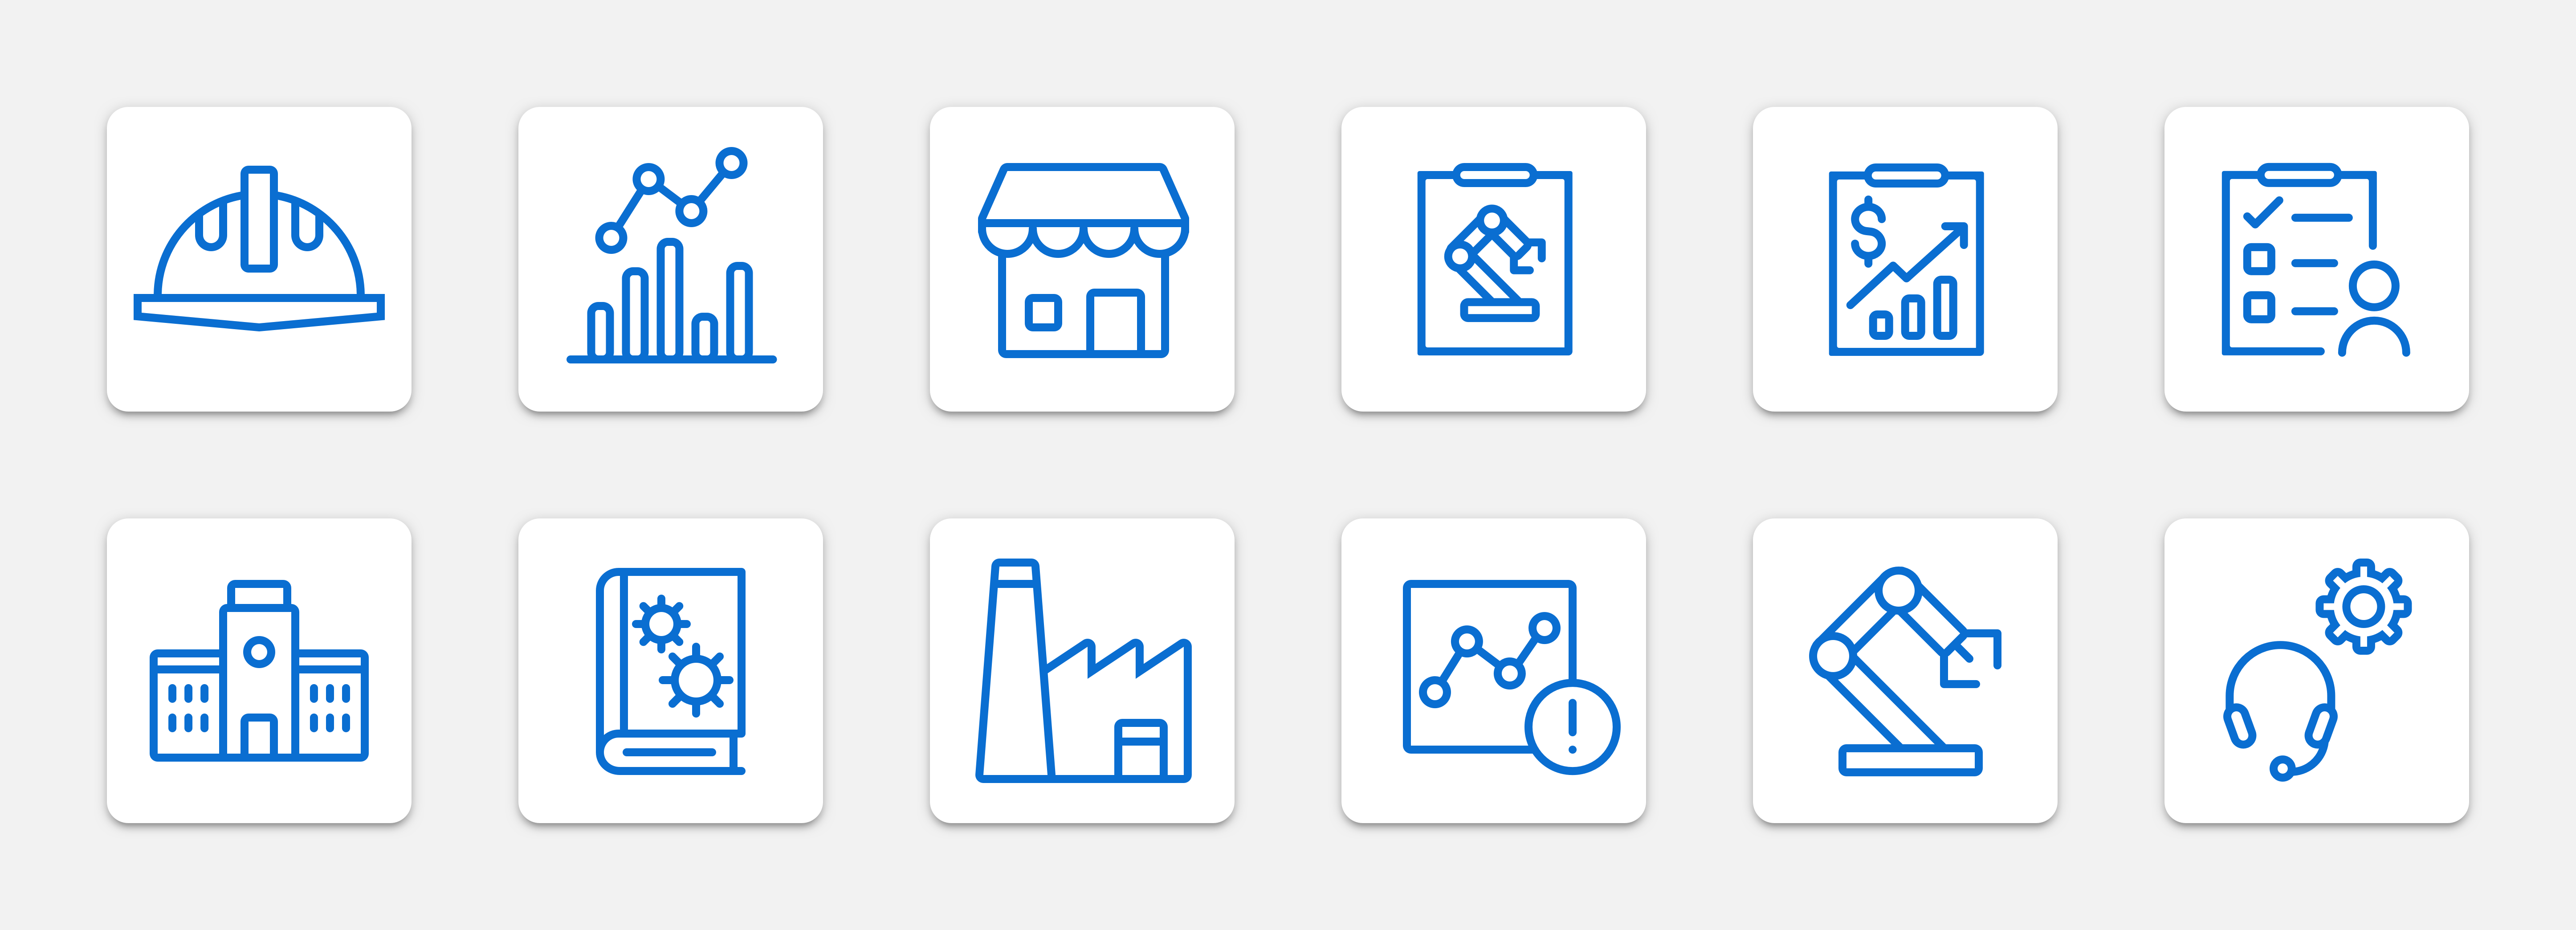 Fiori for Android product icons